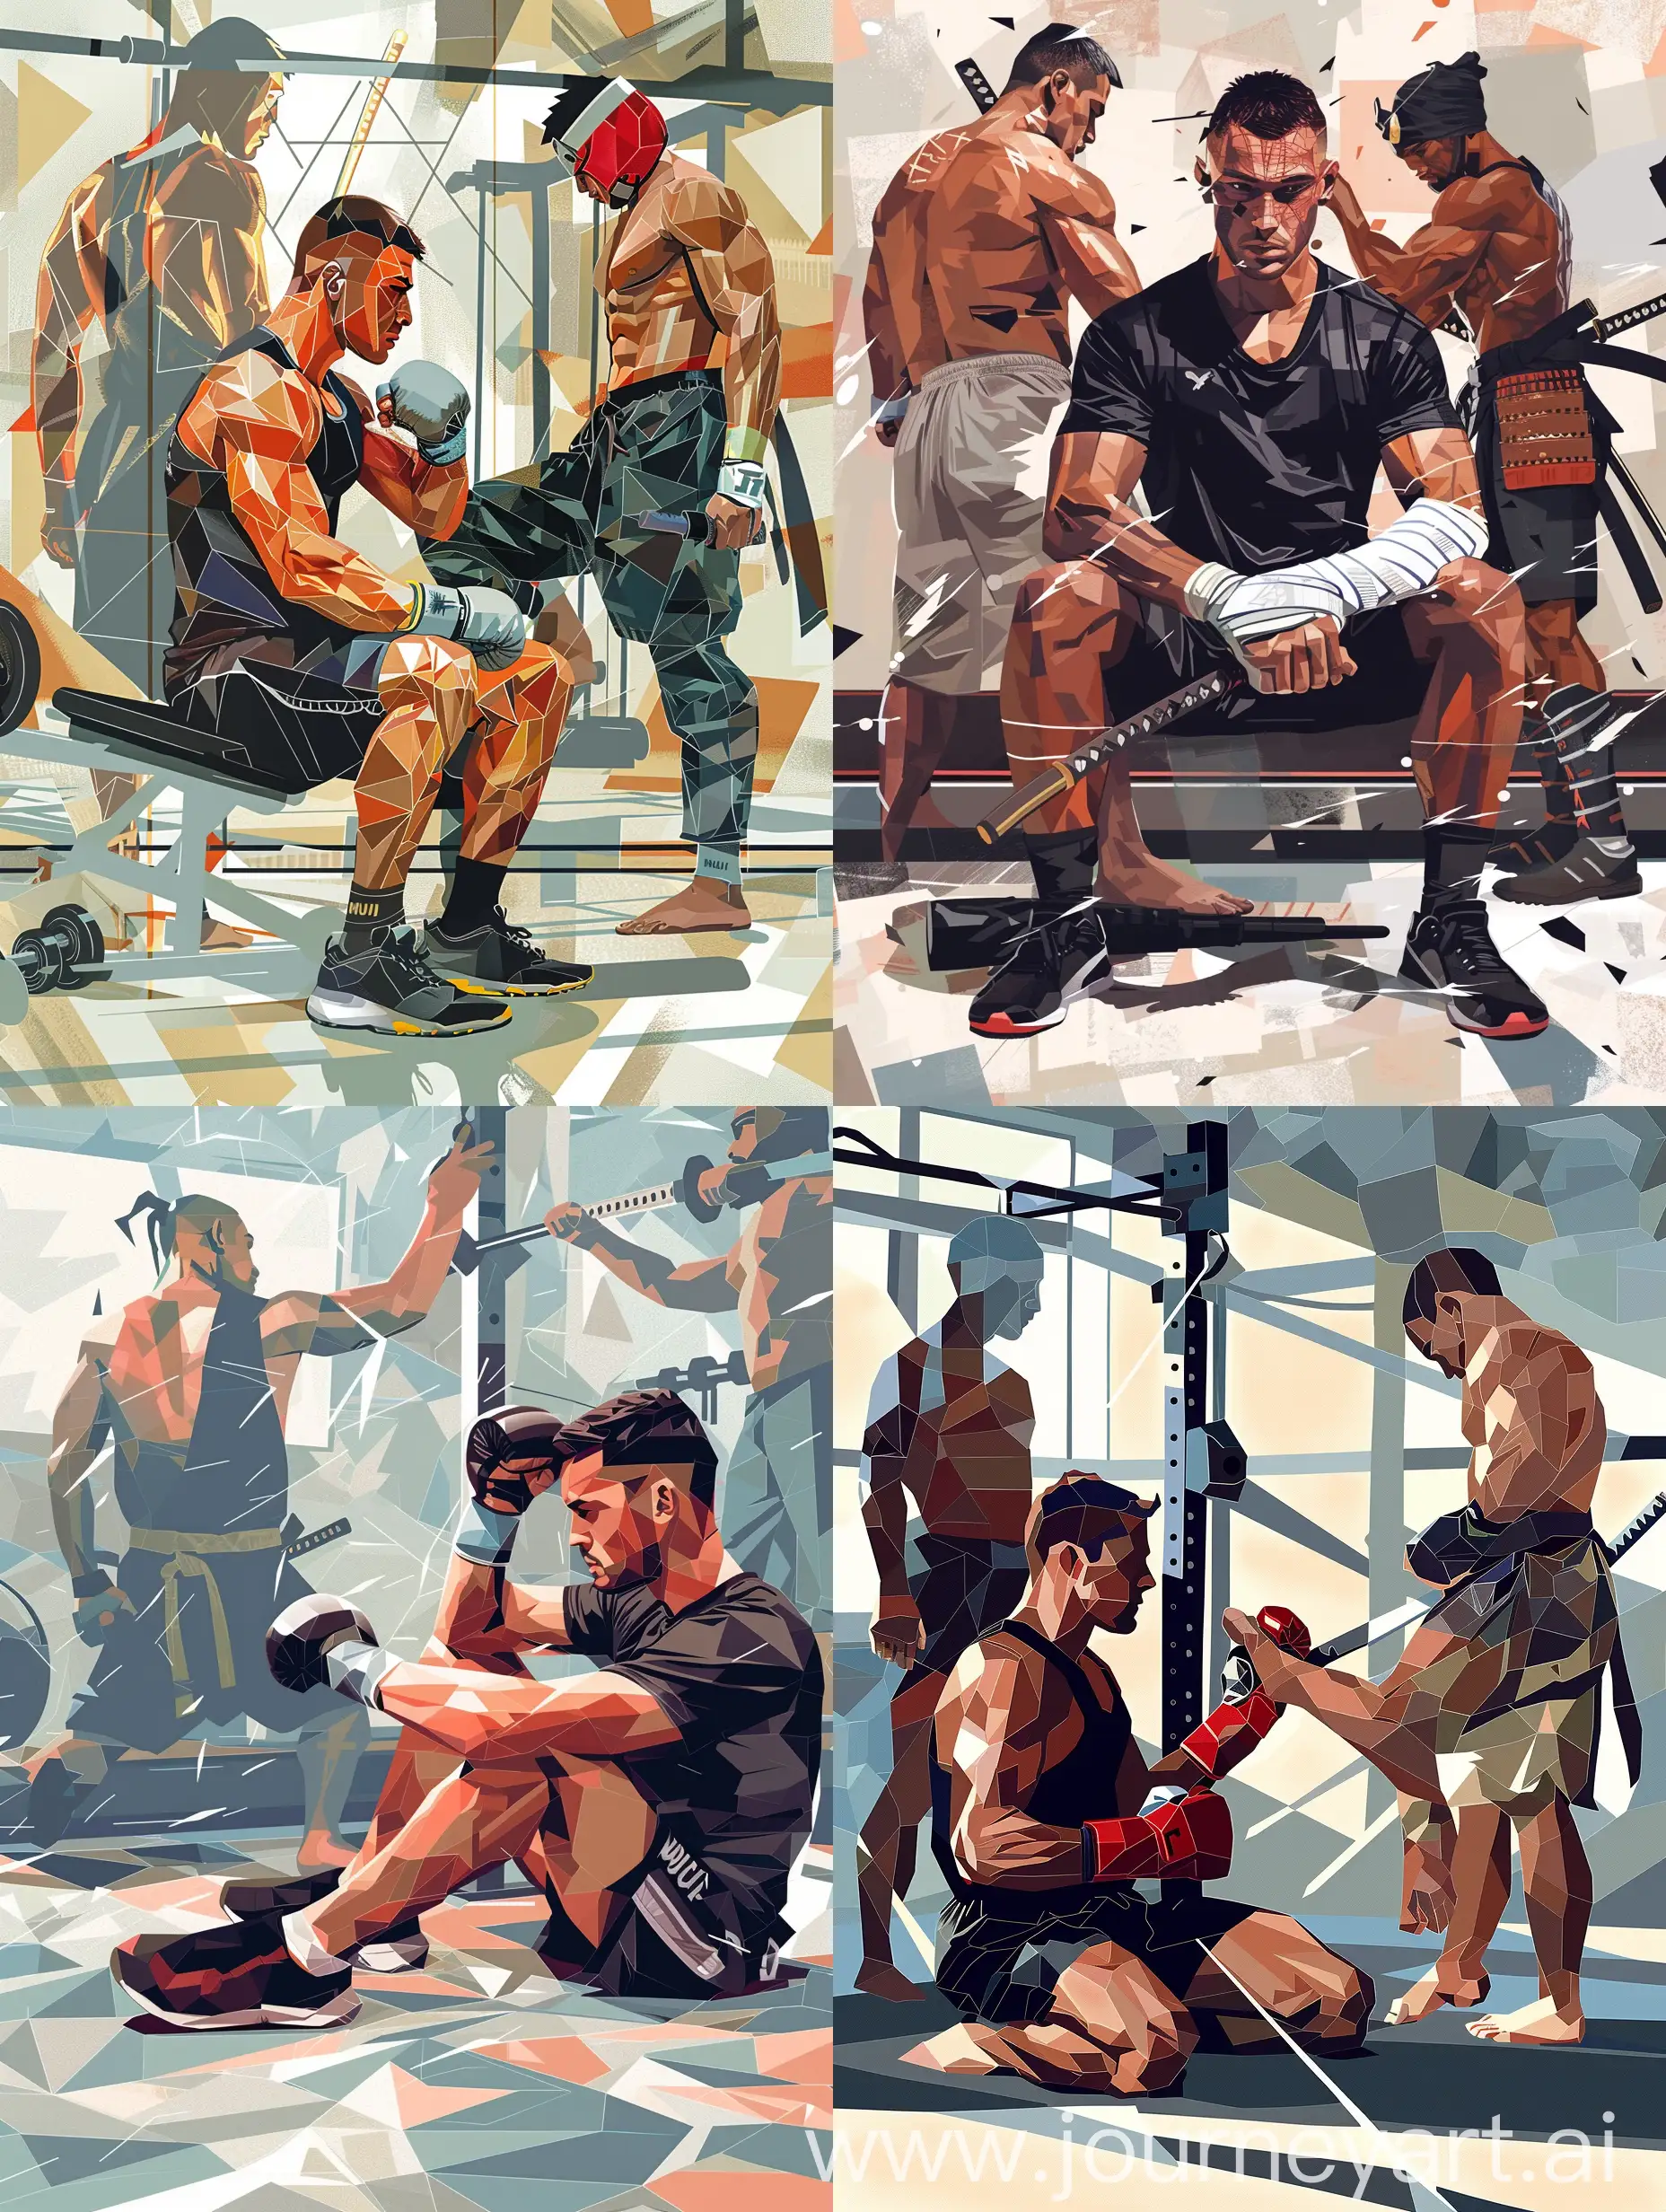 guy(brown, , in gym clothes (black drifit shirt and muay thai shorts)) hand wrapping sitting at the gym 
in vector and cubism style art.  samurai in normal clothes slicing him from the back, and muay thai figher kicking him from the back